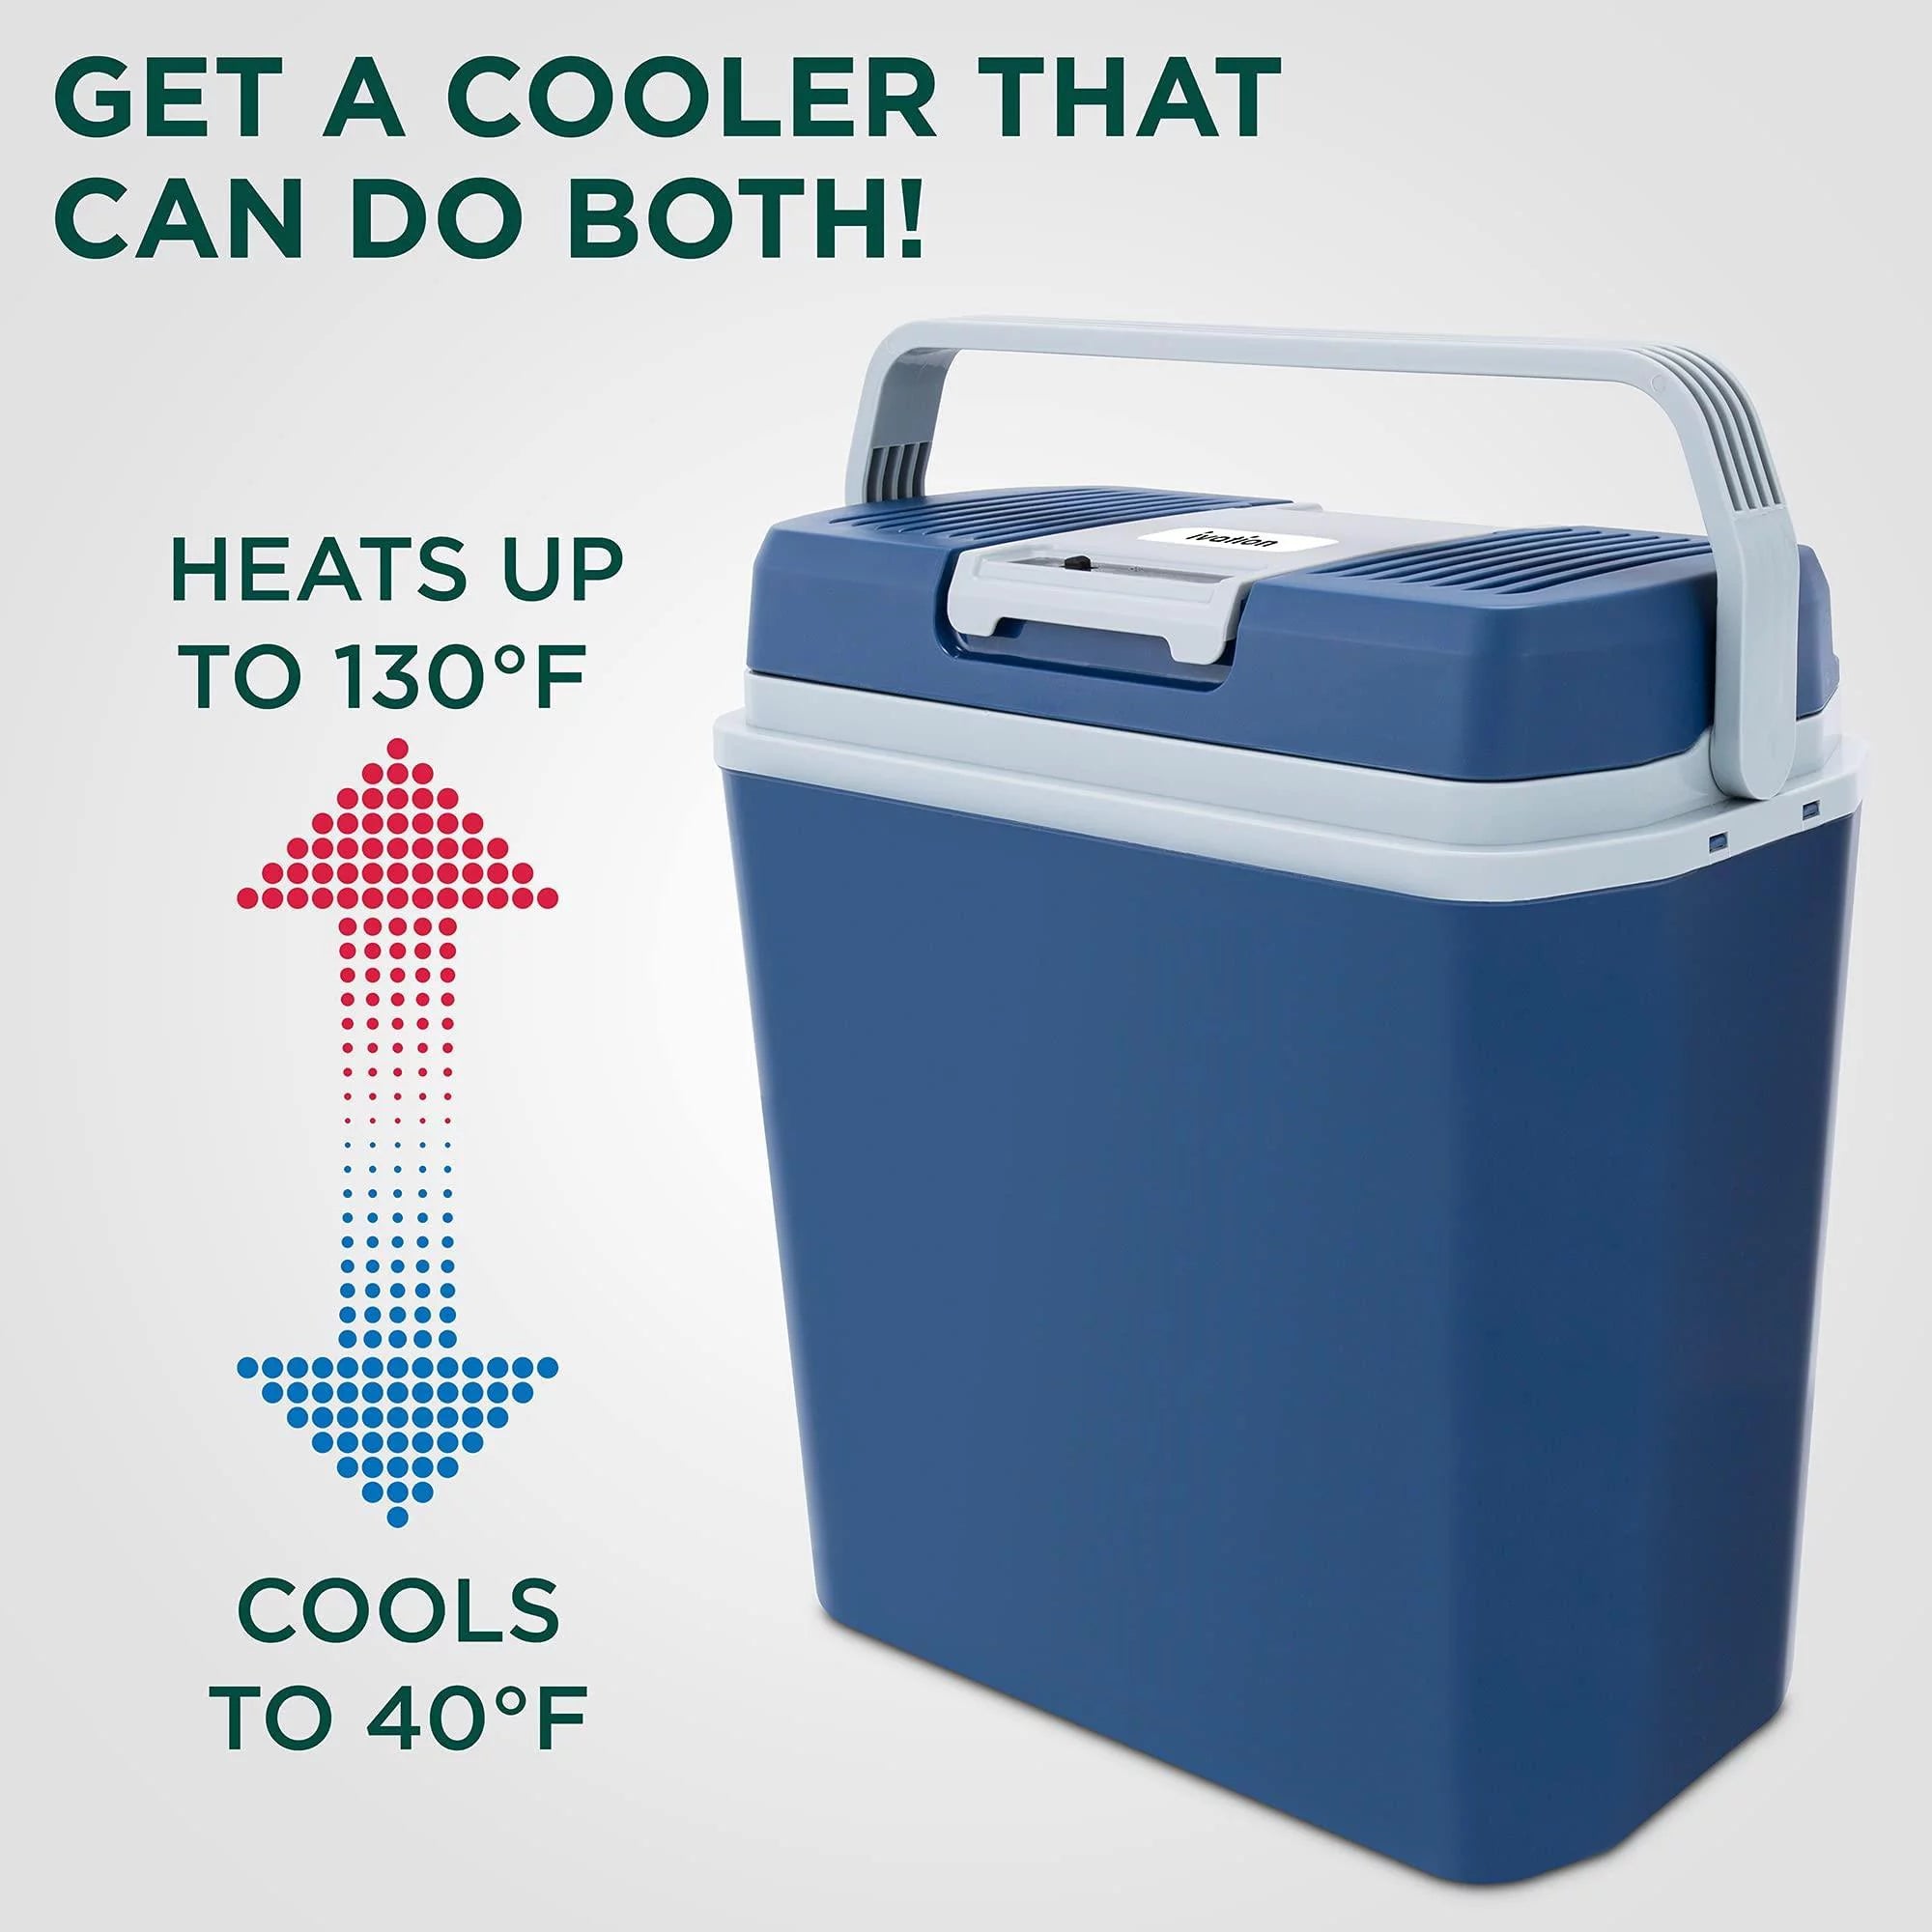 Electric Cooler & Warmer, 24 L Portable Thermoelectric 12 Volt Cooler with Handle (Blue)